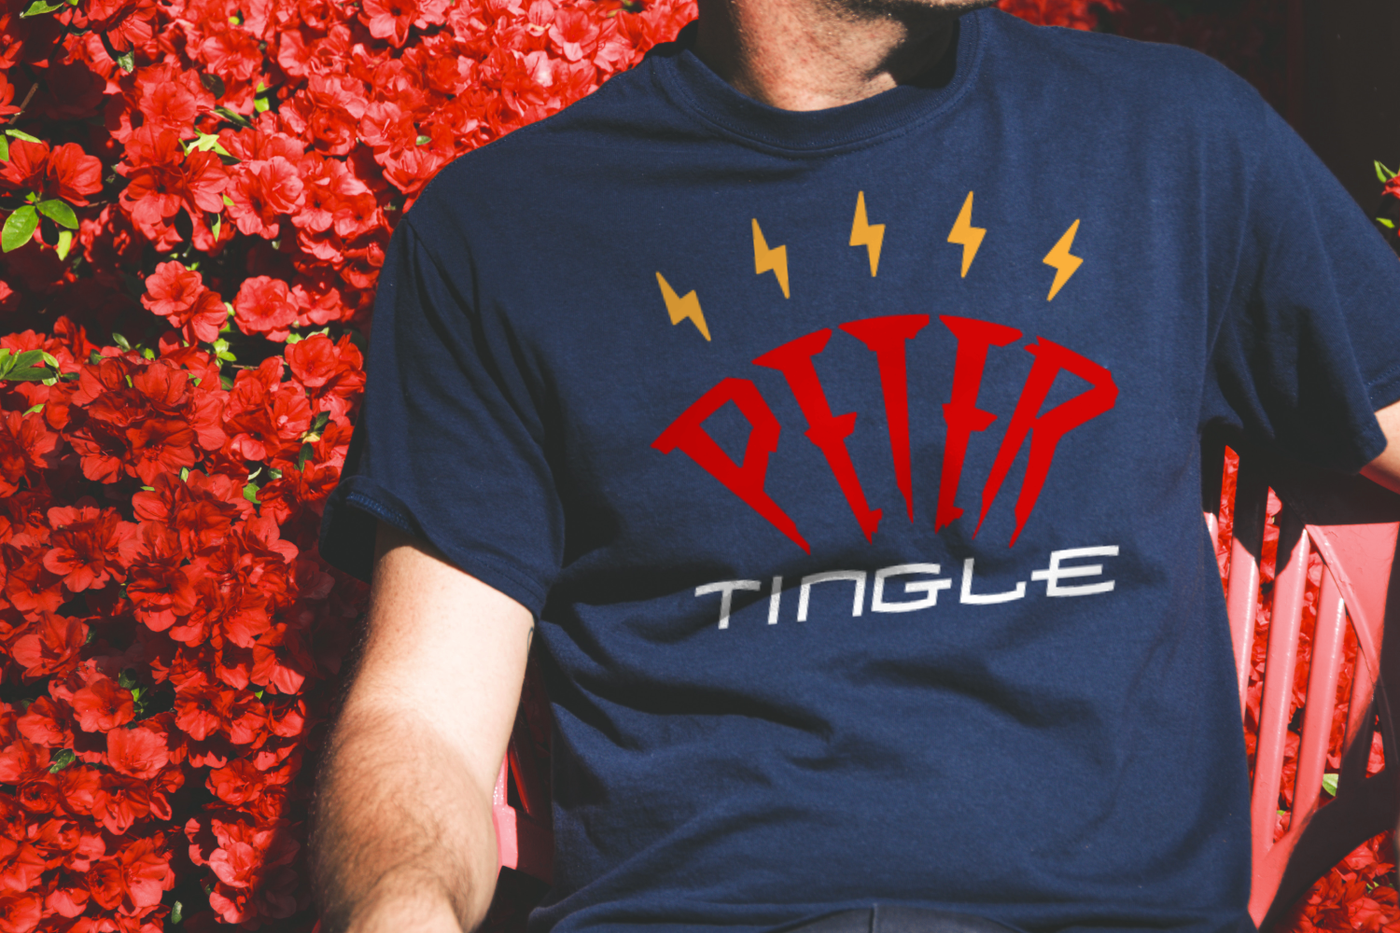 Design that says "Peter tingle" with spark lines above. Shown on a tee shirt worn by a white man.